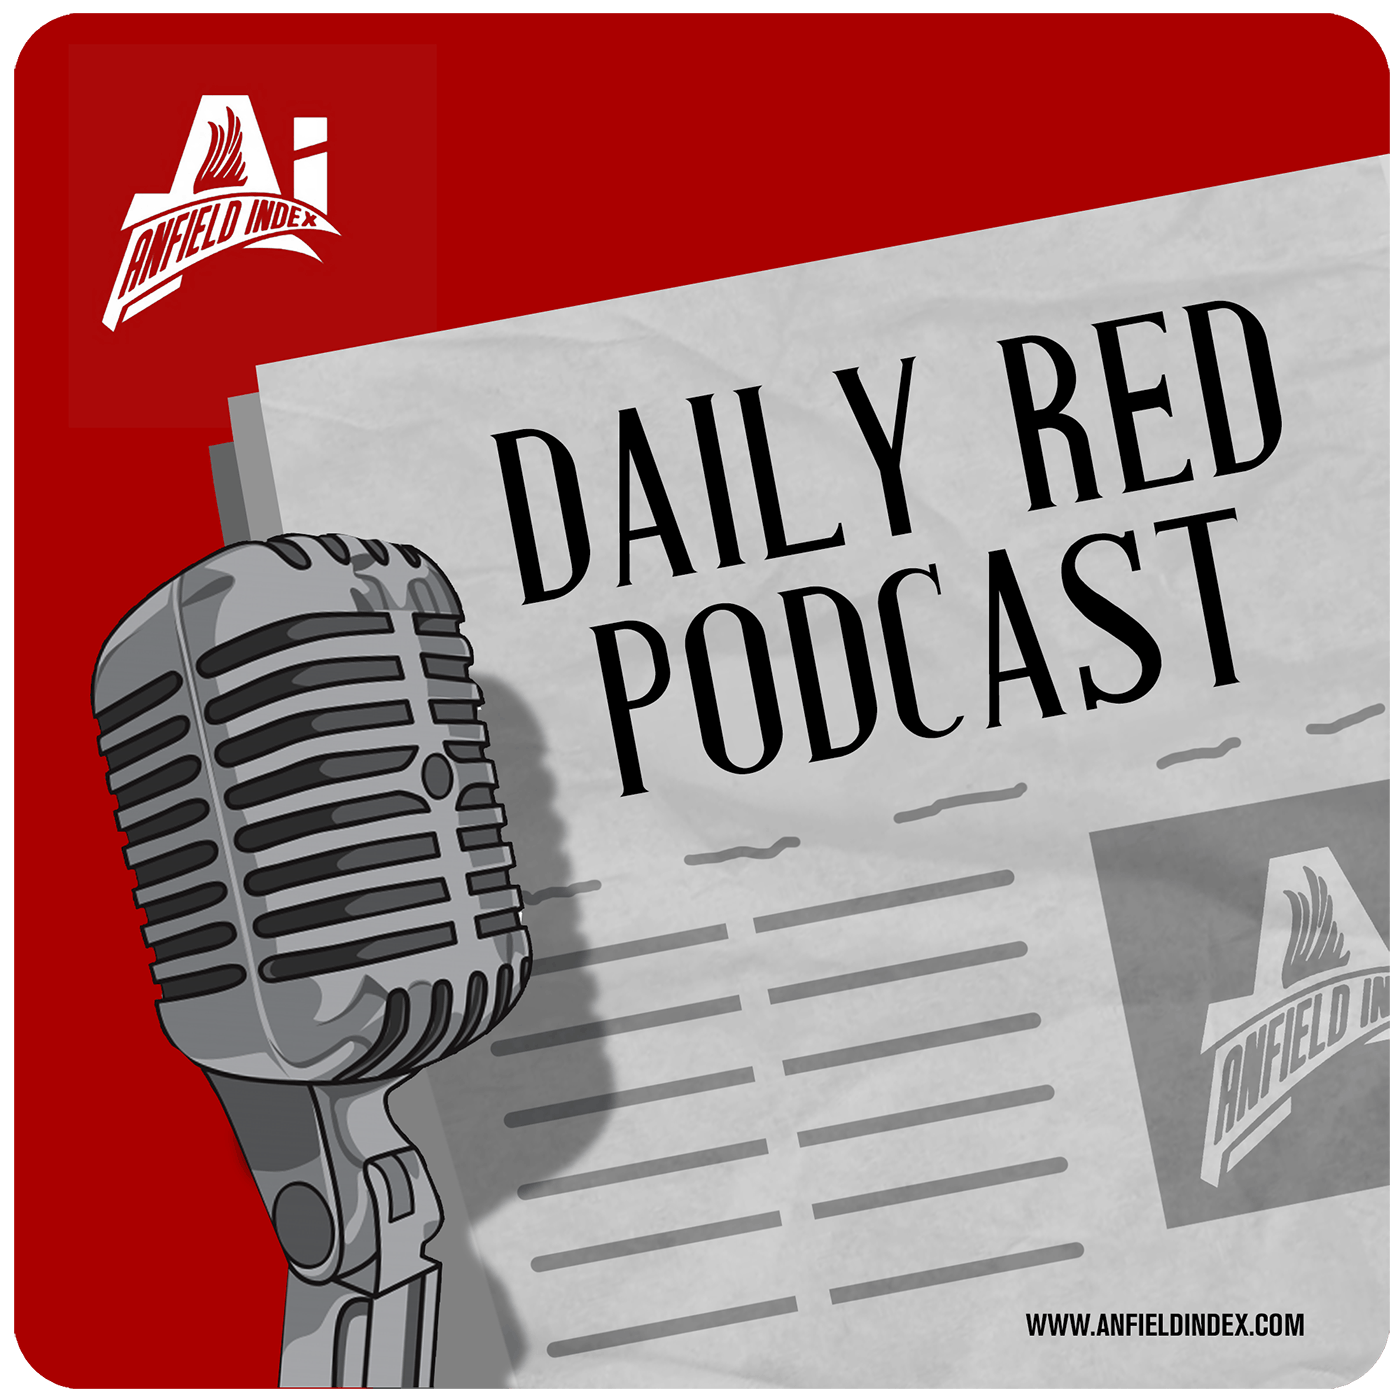 Your Reminder That Liverpool Are League Cup Winners - Daily Red Podcast